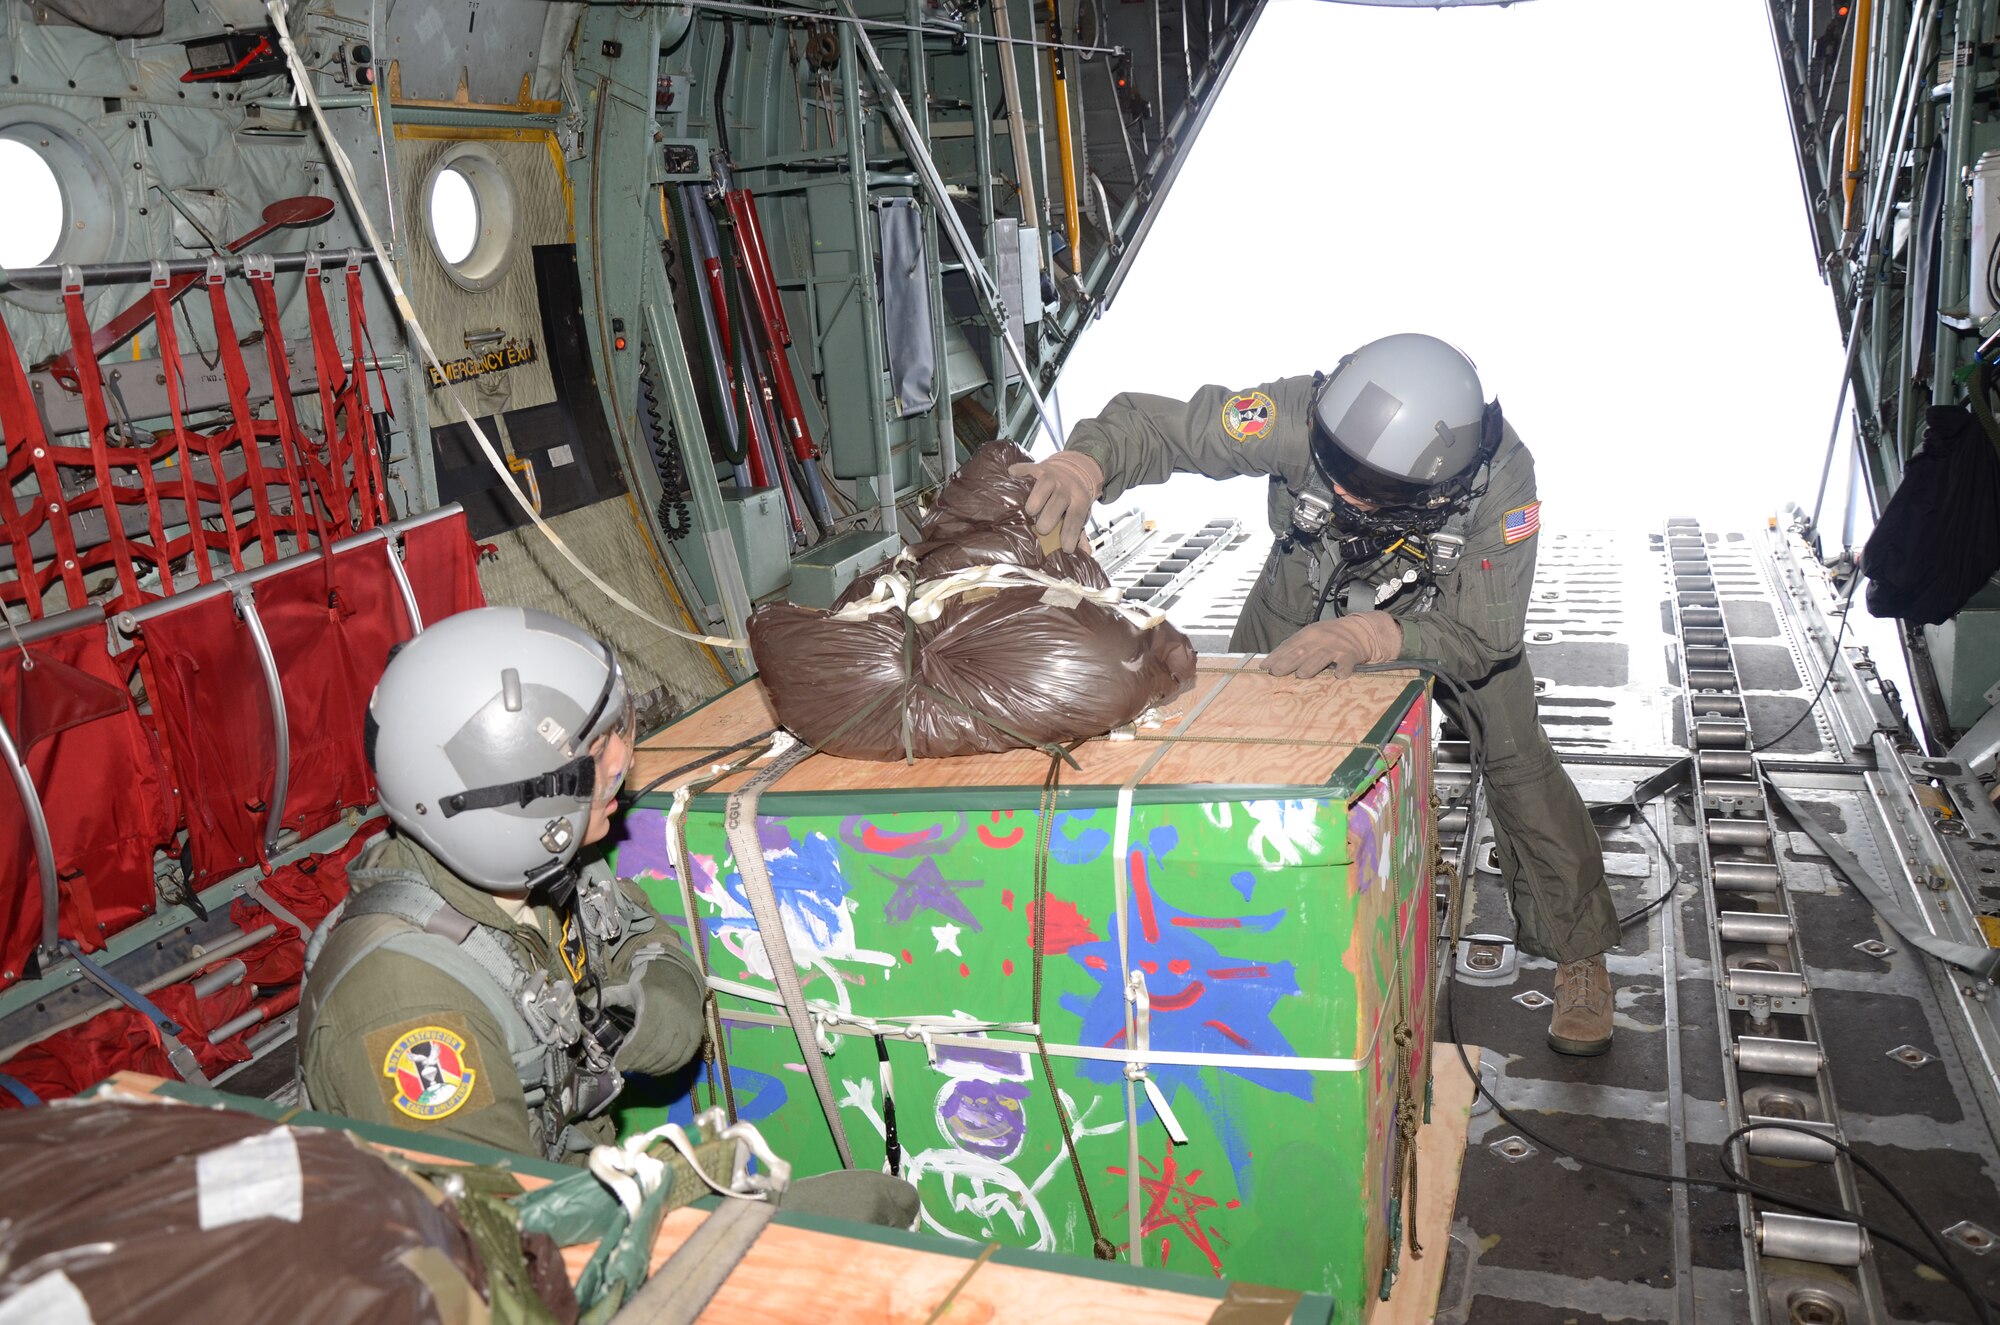 Over Fais Island, Micronesia -  Staff Sgt. Kyle Favorite and Master Sgt. Thomas Larson, 374th Airlift Wing loadmasters, prepare to push a pallet of medical supplies to the island Fais to treat an outbreak of dengue fever.  The island of Fais is located within the Yap state of the Micronesian Islands, and is one of the more than 50 islands that will receive care packages this holiday season as part of Operation Christmas Drop.  (U.S. Air Force photo/Senior Airman Veronica McMahon)